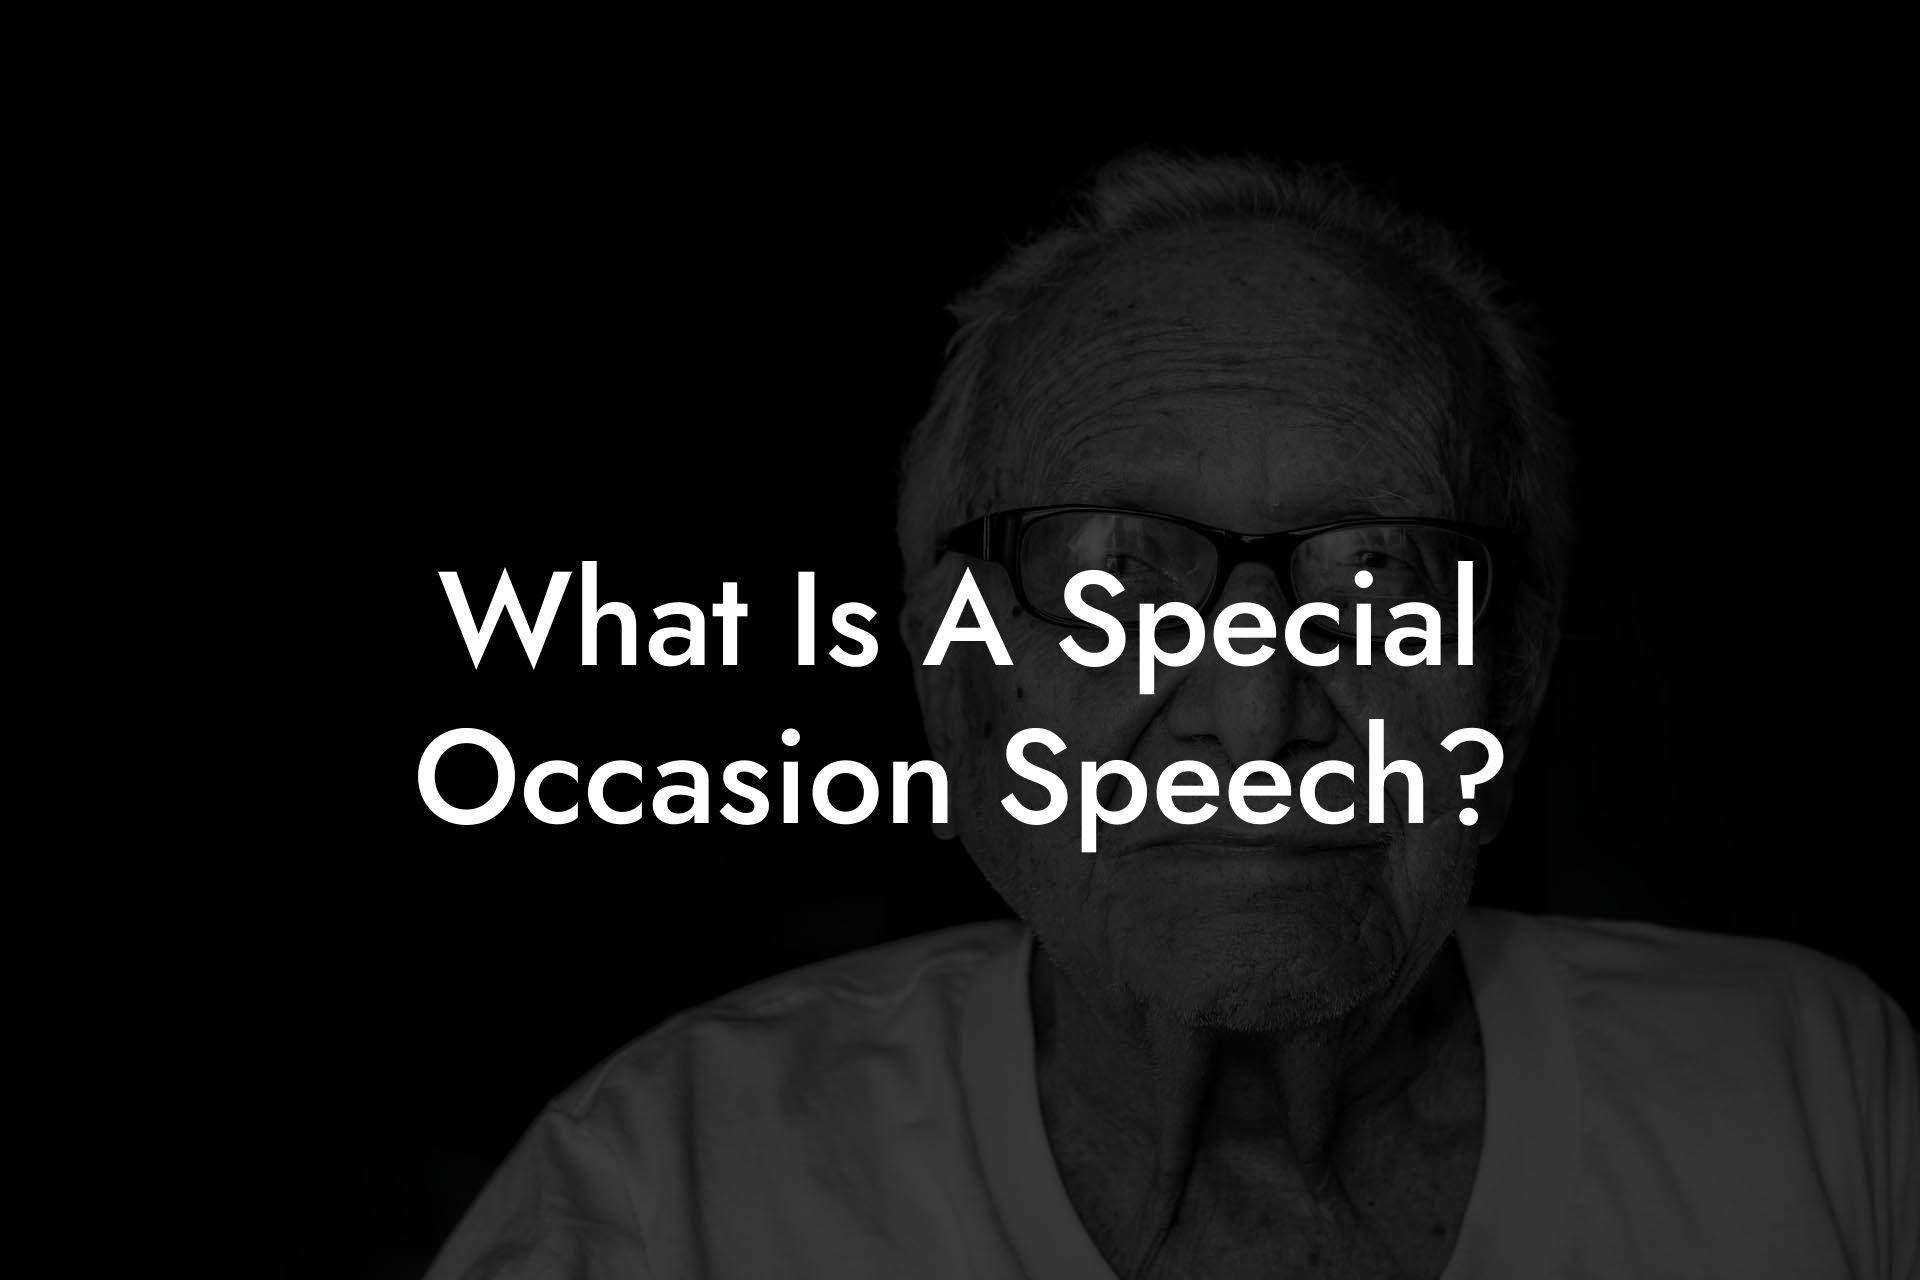 What Is A Special Occasion Speech?